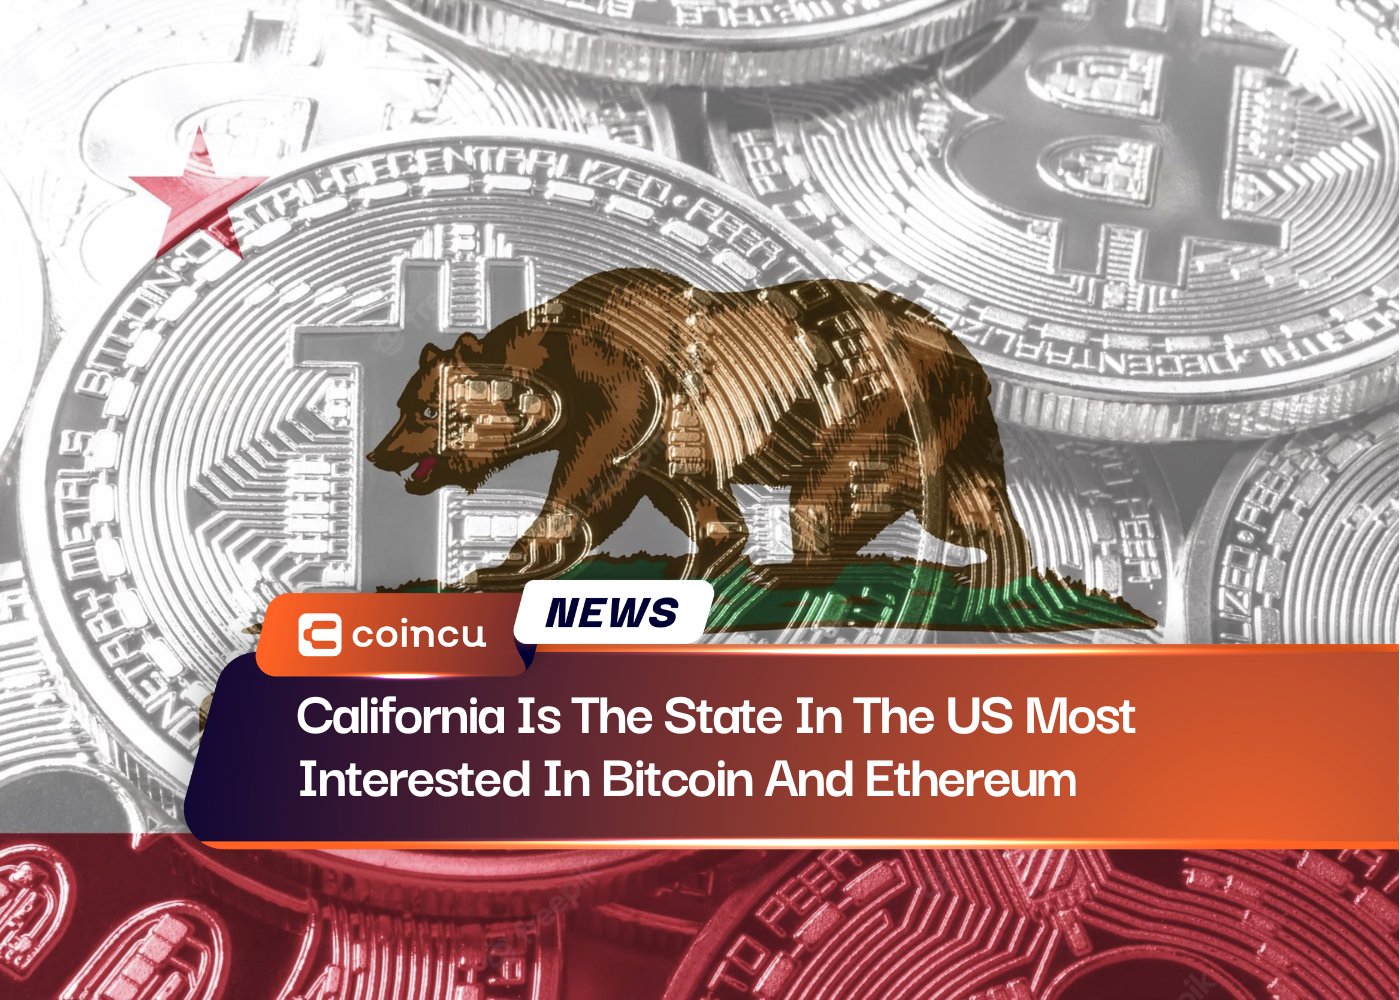 California Is The State In The US Most Interested In Bitcoin And Ethereum